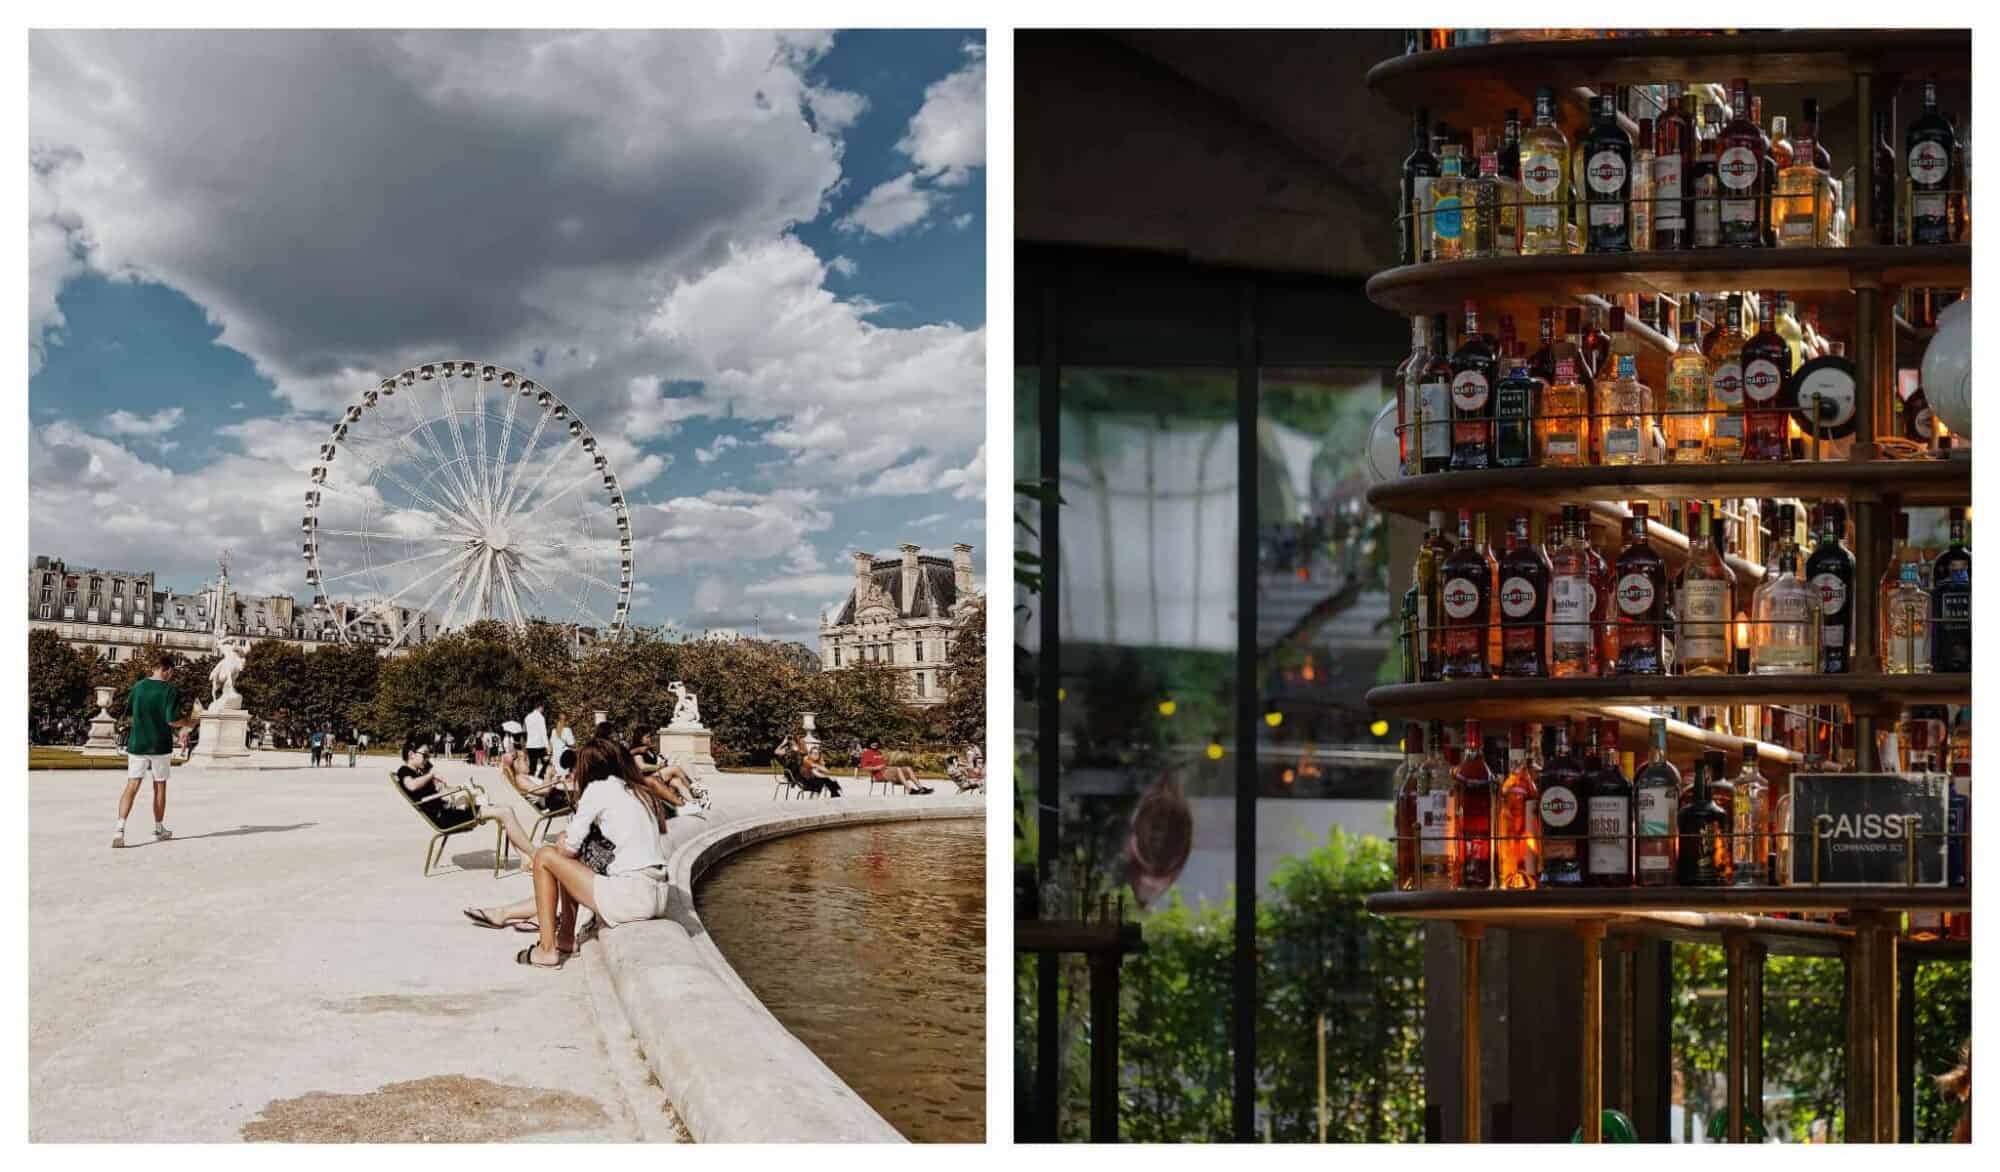 Left: A Parisian park in the summertime with people dressed in summer clothes loitering on the grounds; right: the bar area of a cocktail bar in Paris.